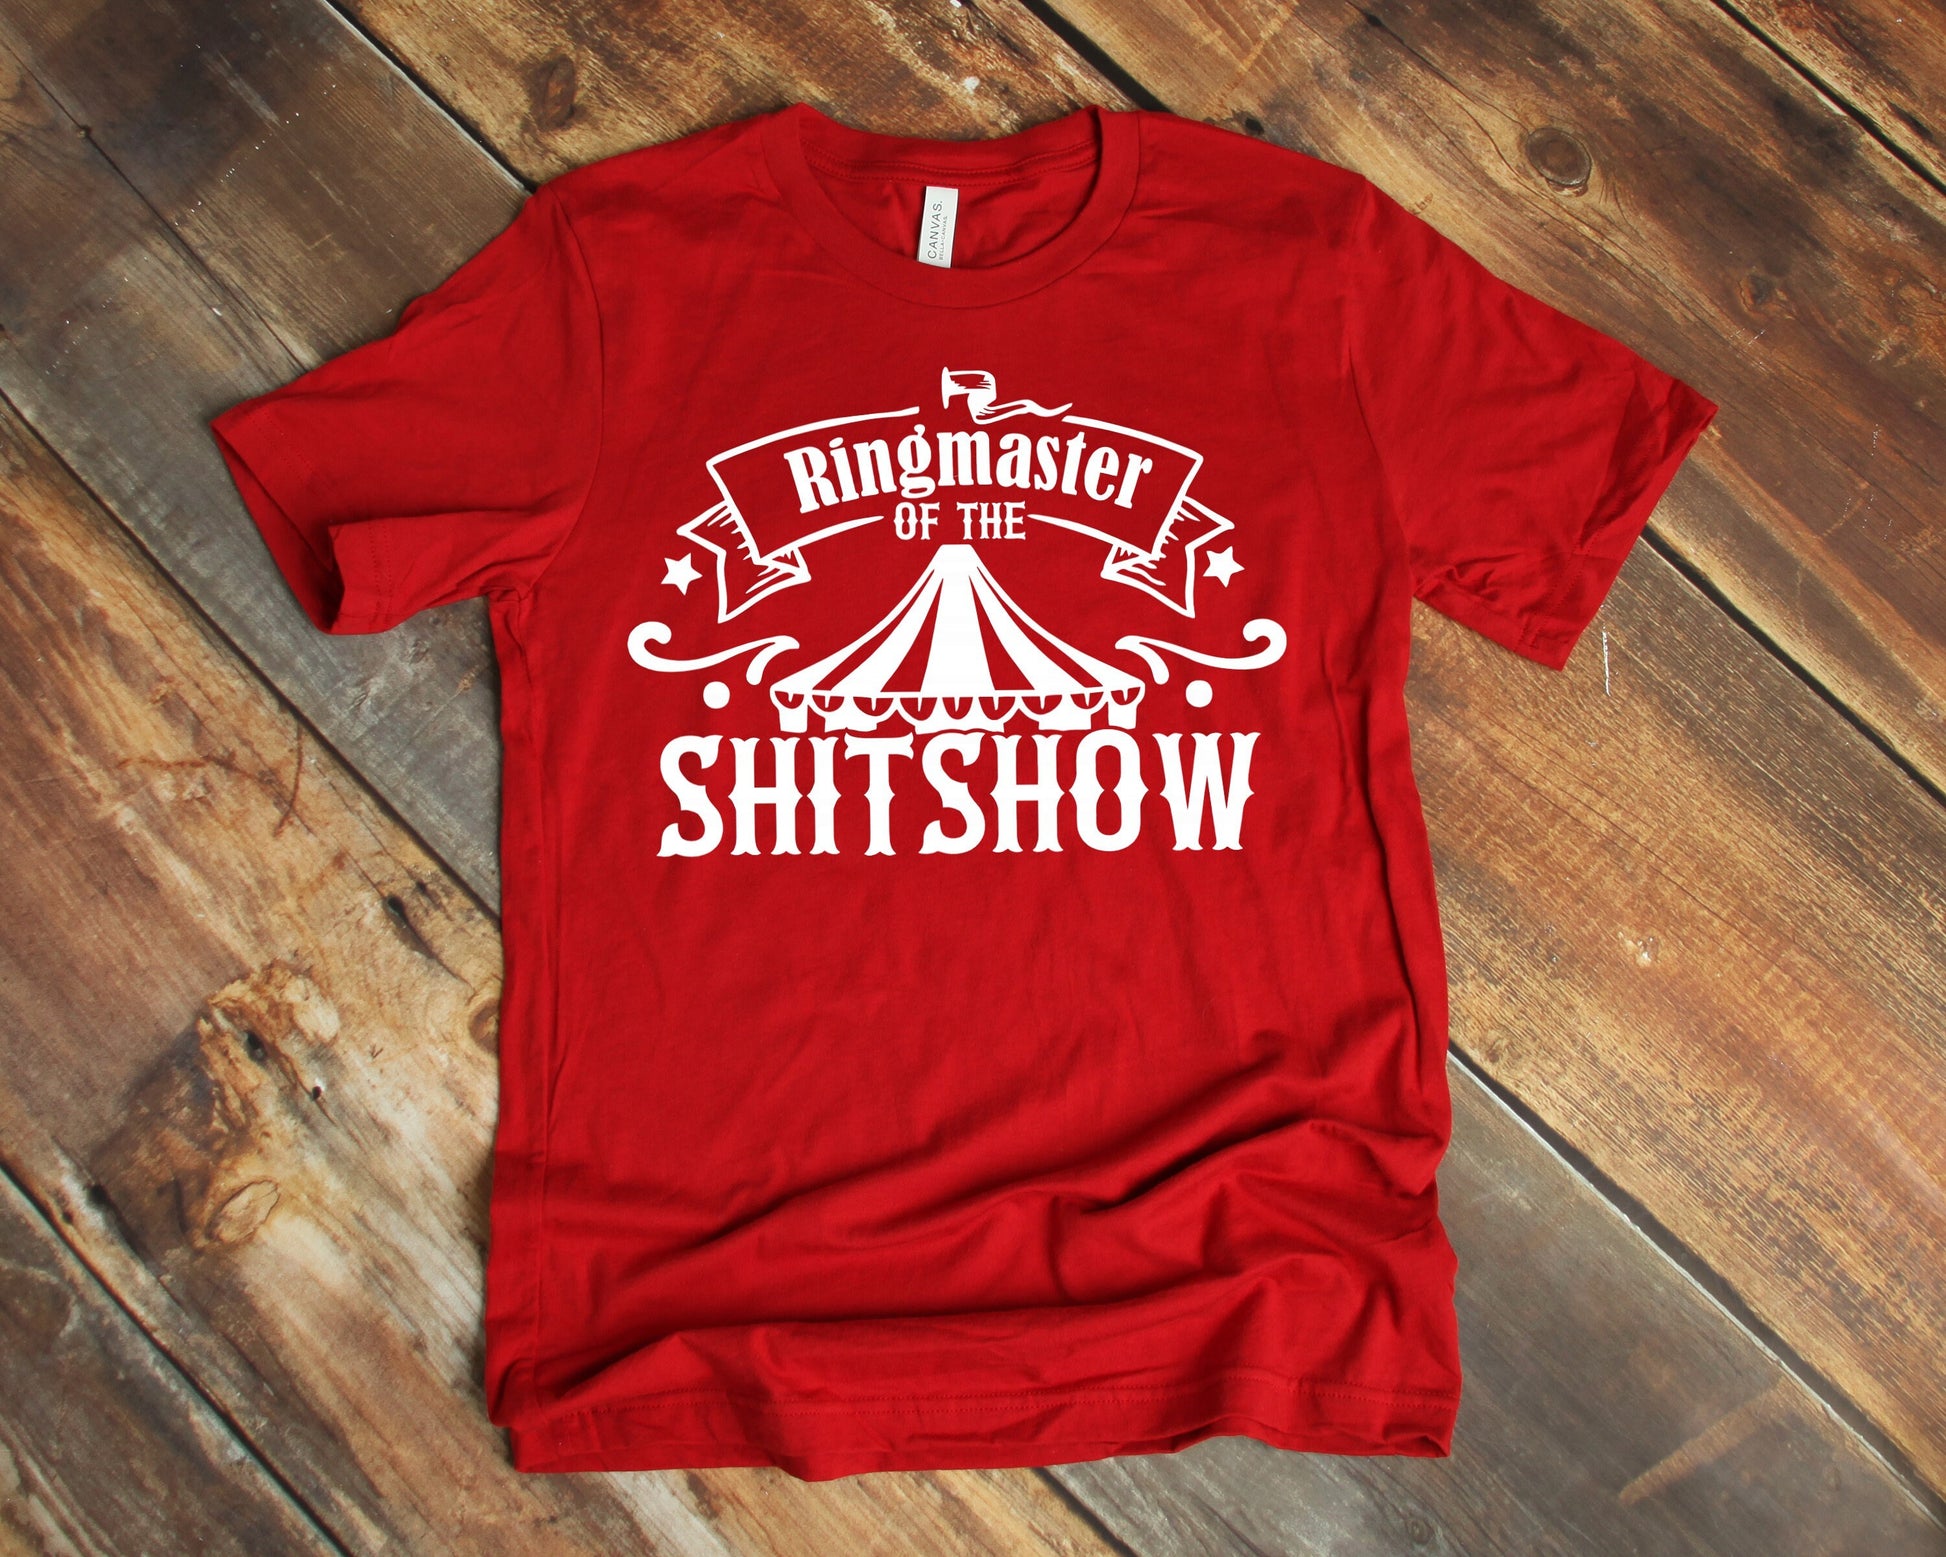 Ringmaster of the Shitshow unisex t-shirt - funny t-shirt - shirt for dad - shirt for mom - funny gifts - novelty t-shirt - offensive shirts